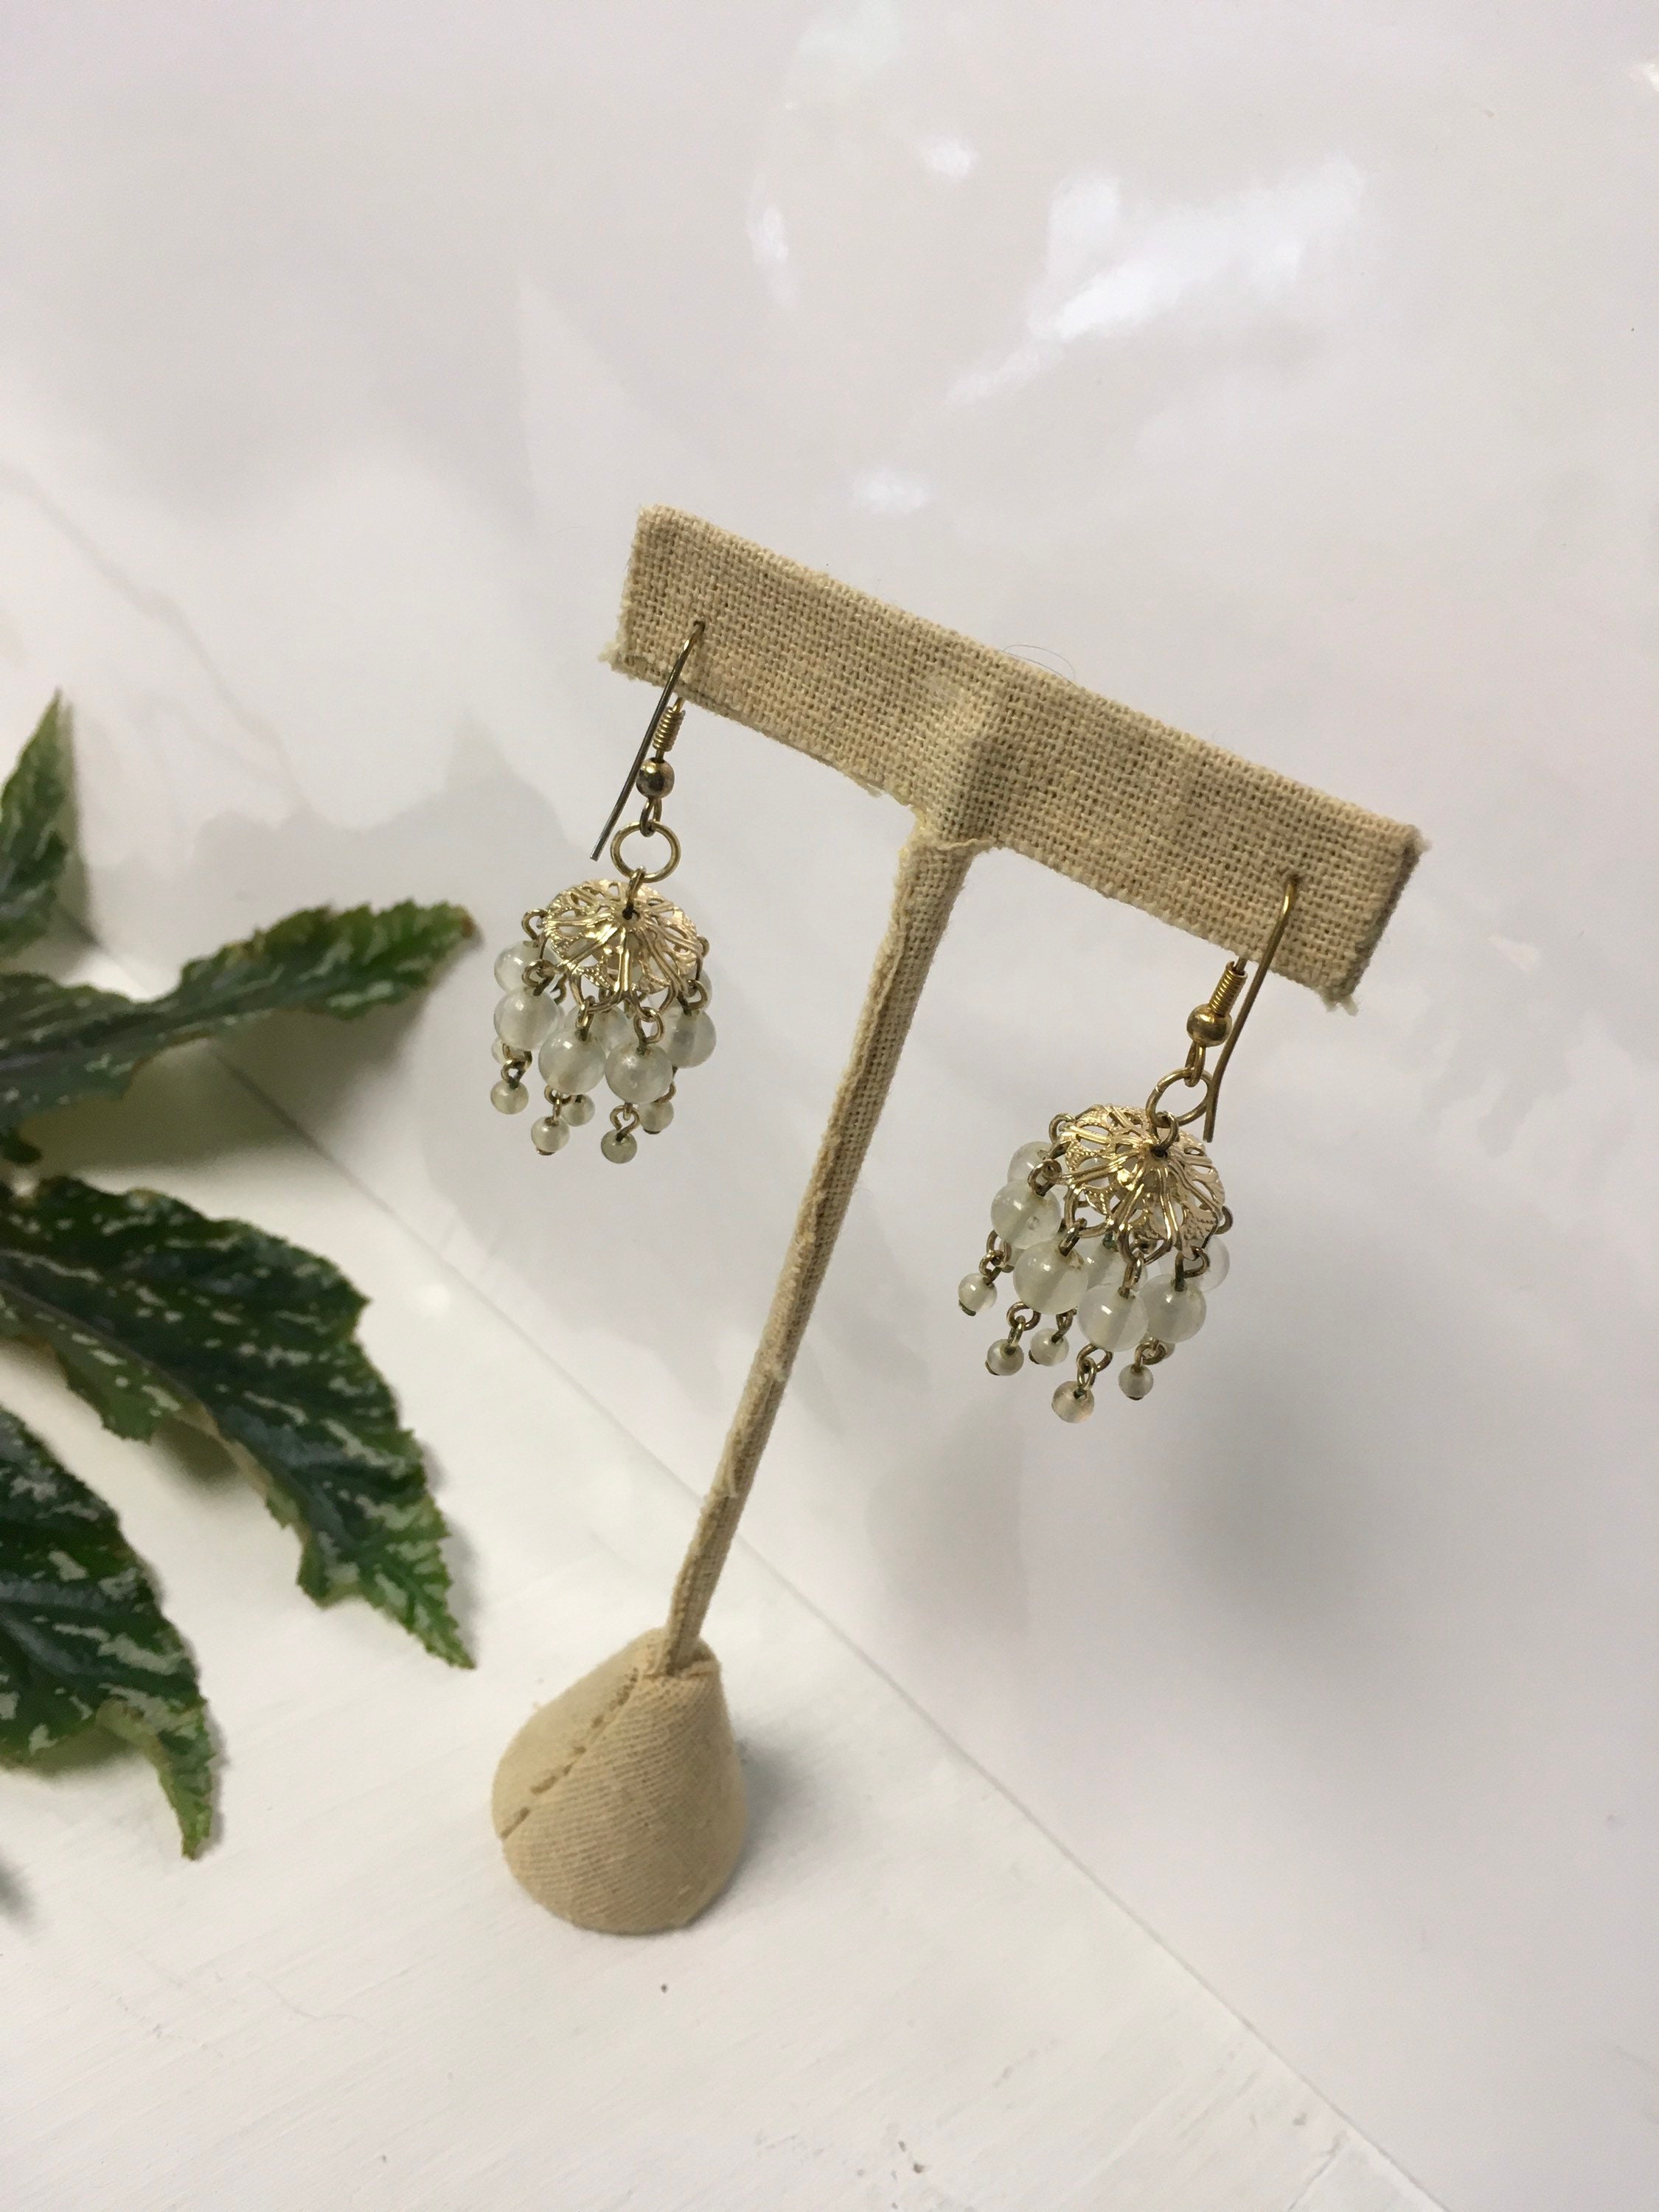 UPCYCLED DIAMOND DANGLE EARRINGS – The Chandelier Rose Boutique